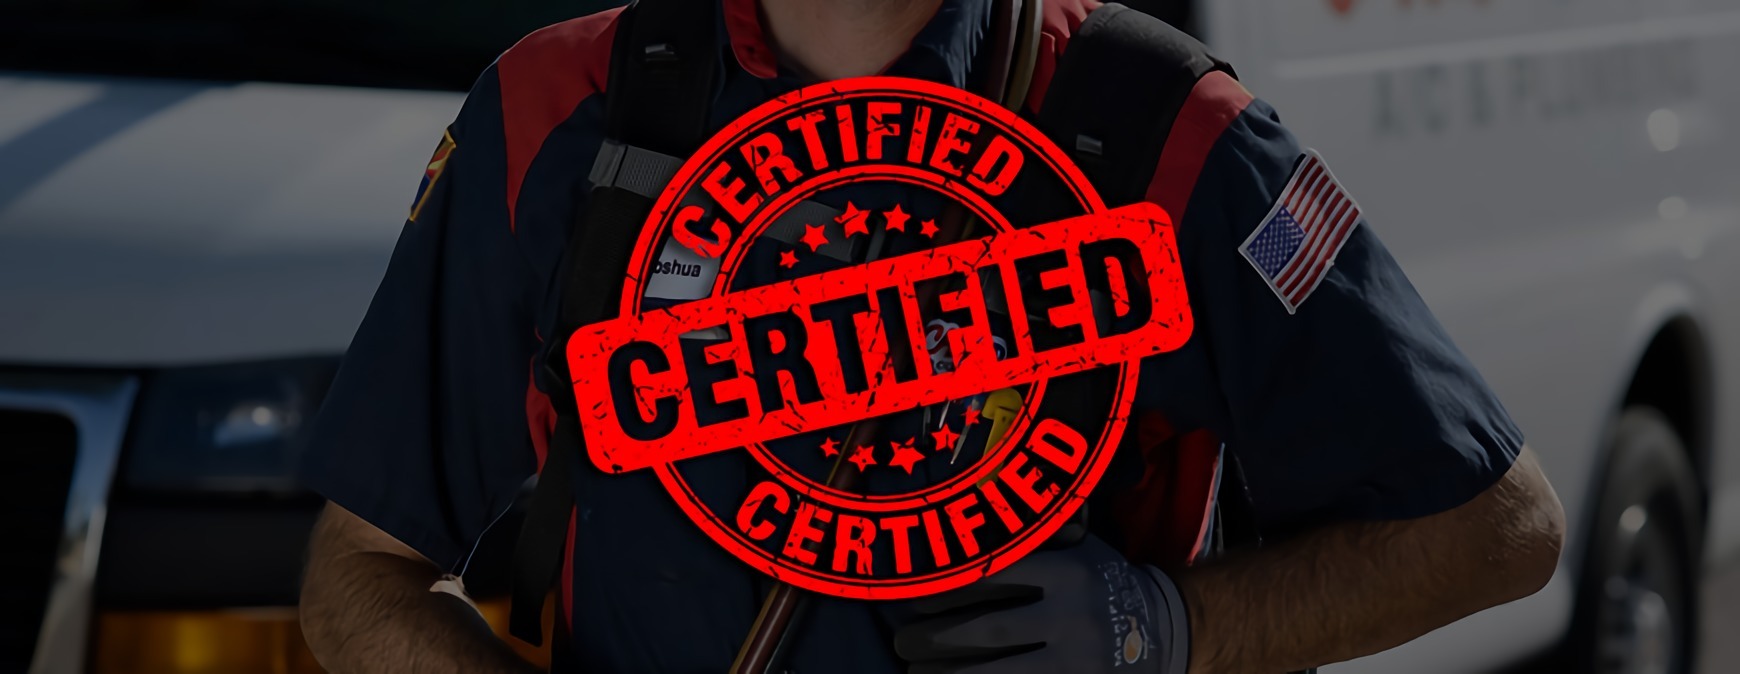 hvac specialty certifications